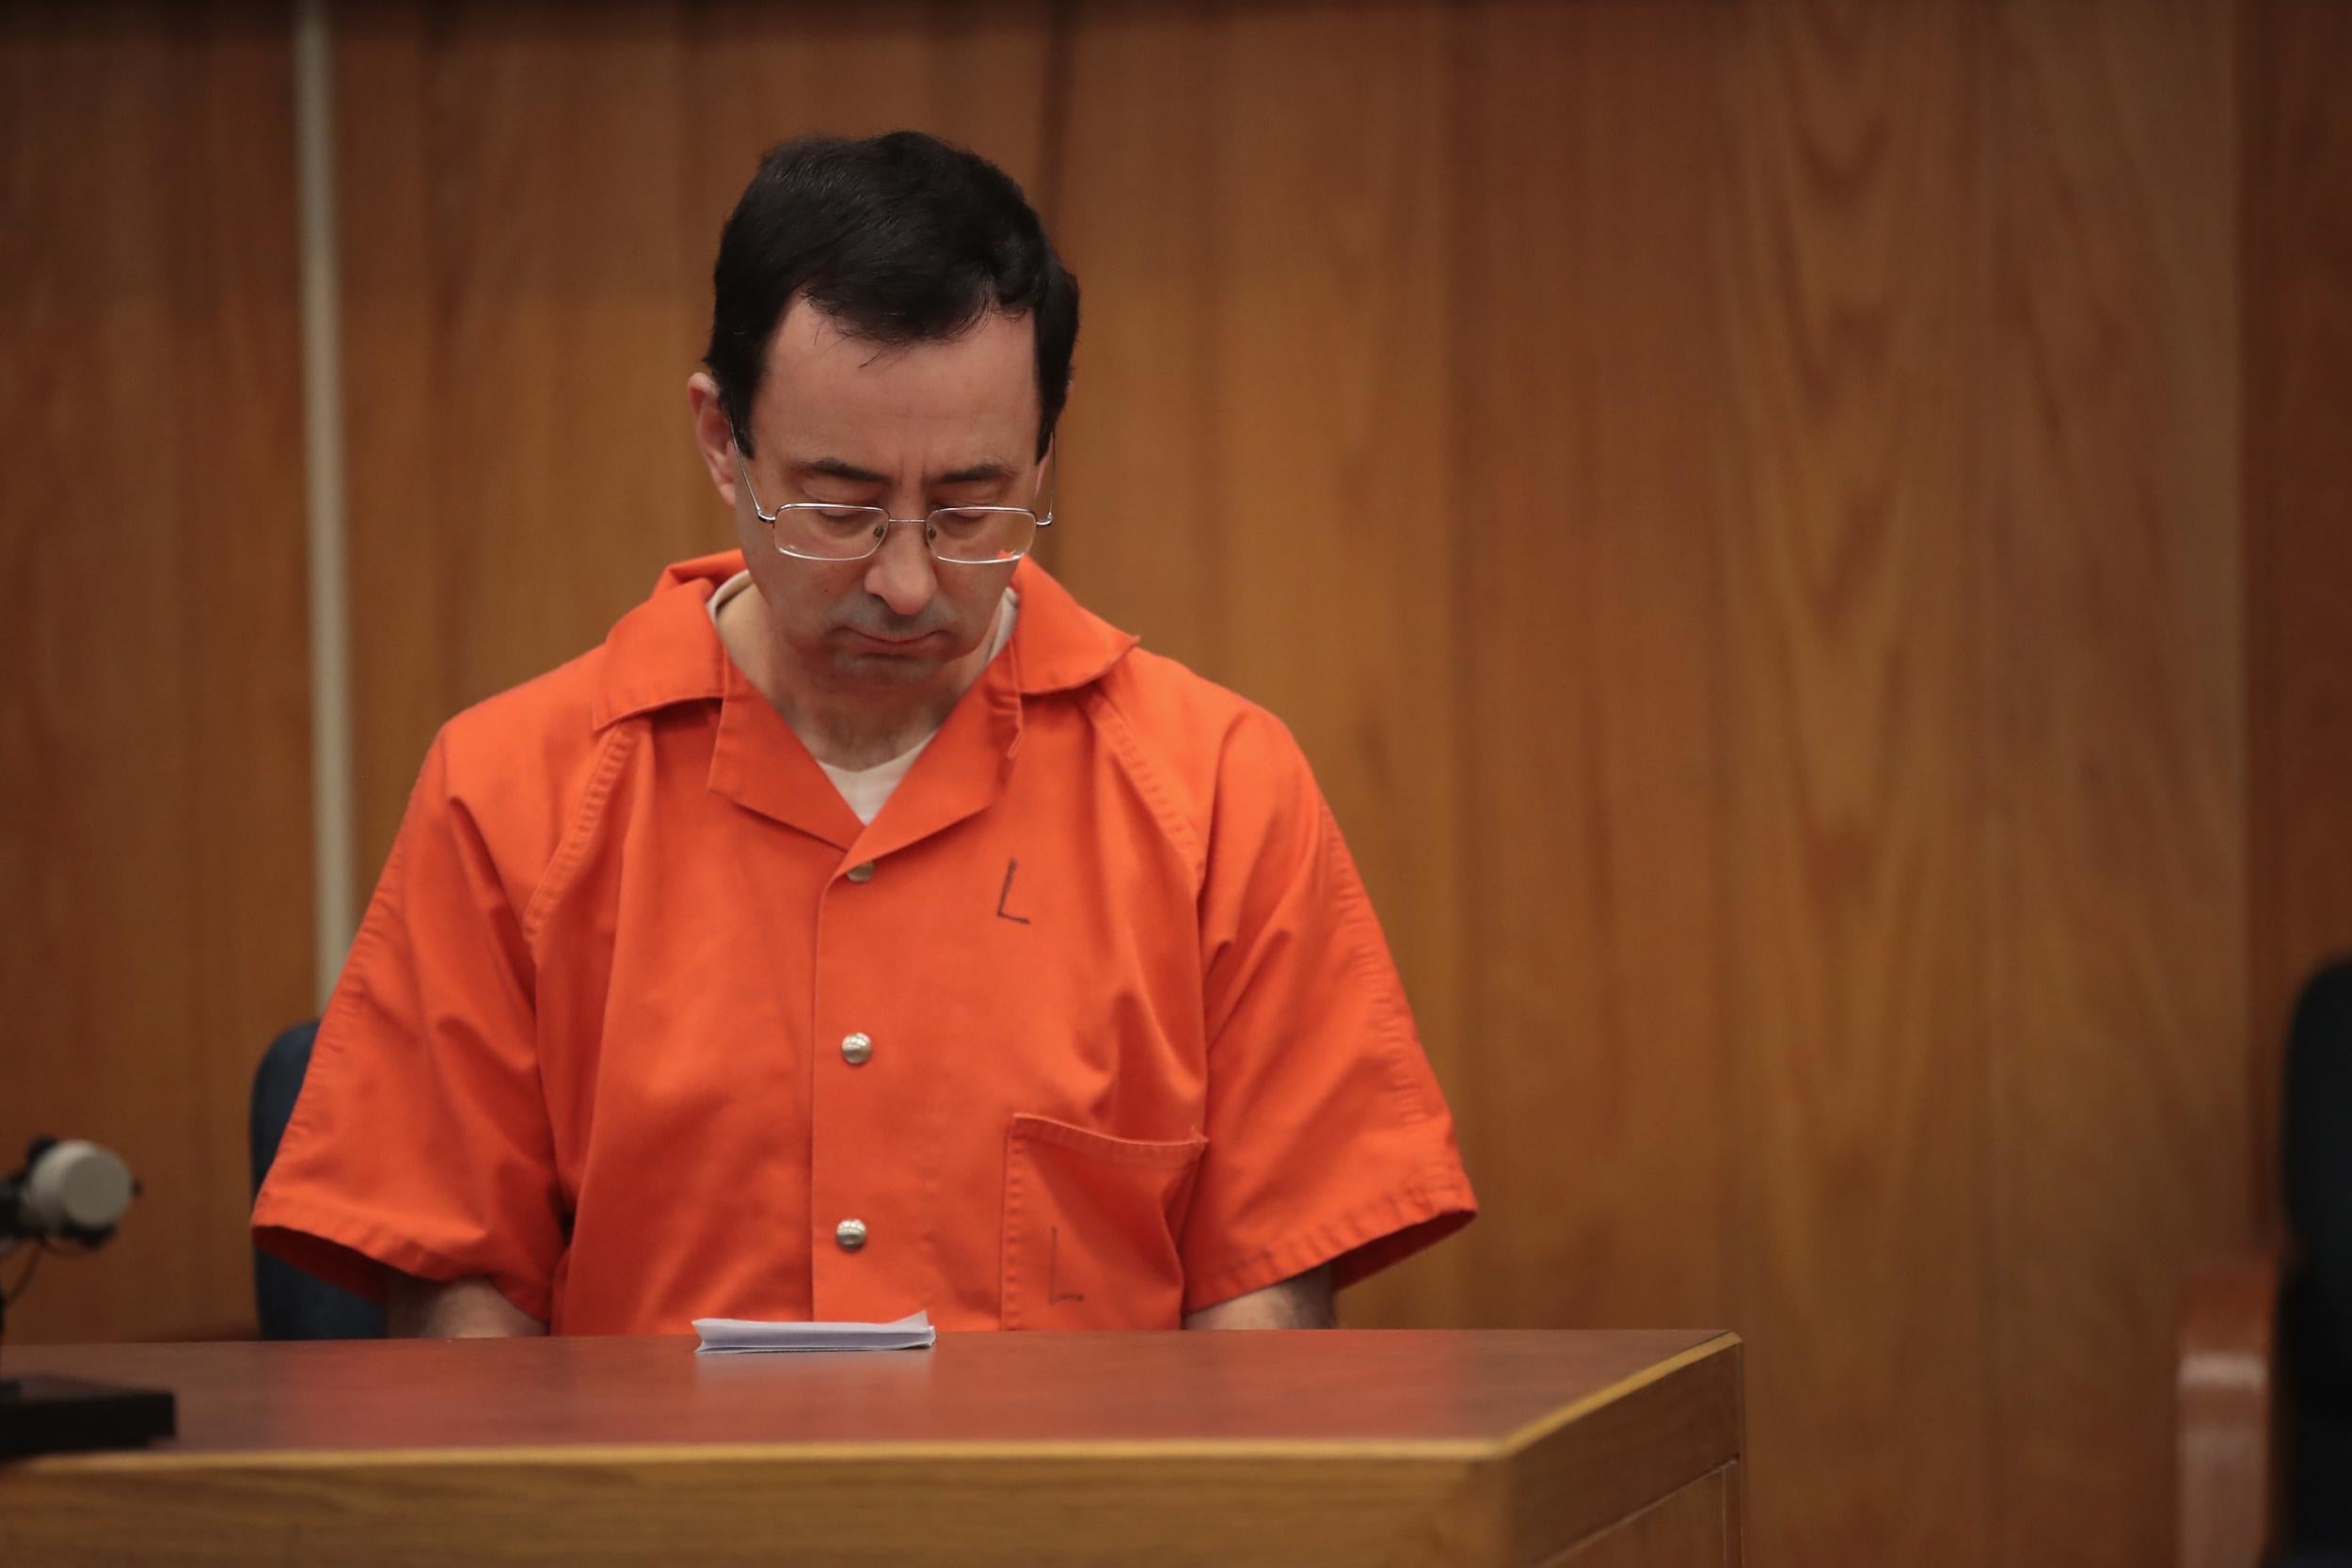 The decision comes after complaints over the handling of the sex abuse scandal involving former team doctor Larry Nassar